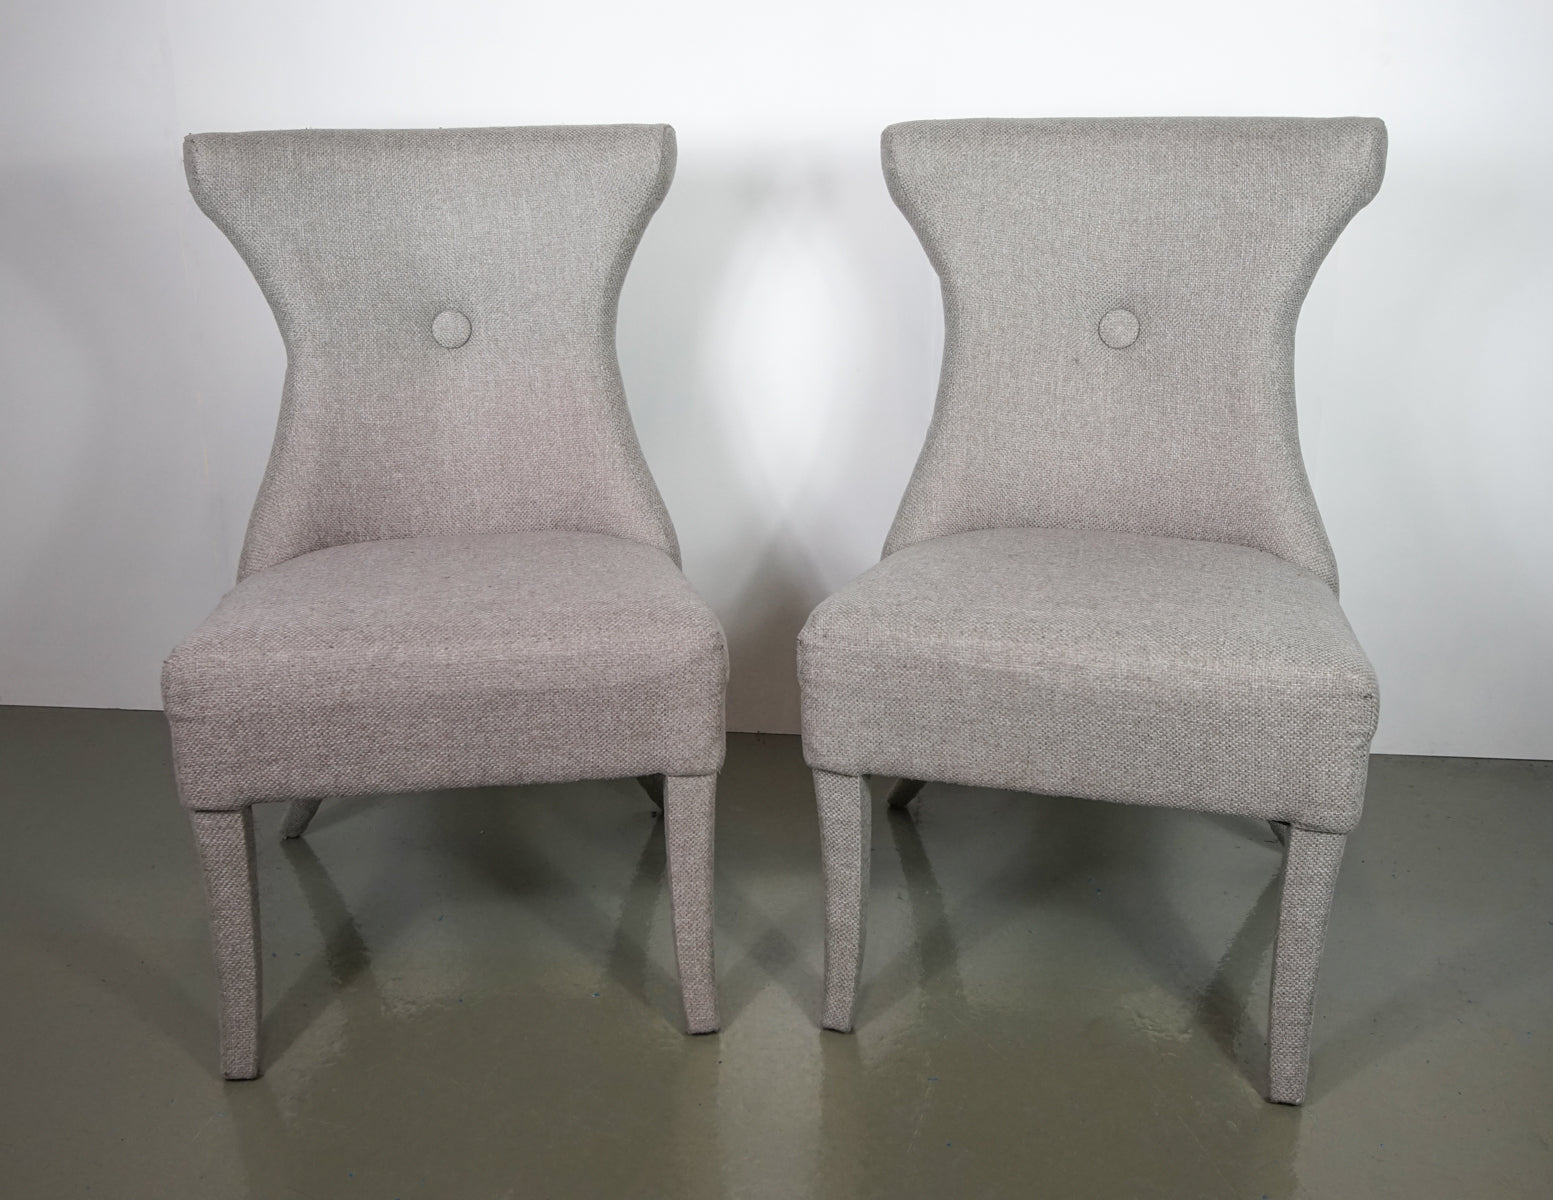 Kelly Hoppen Chairs (2 units)